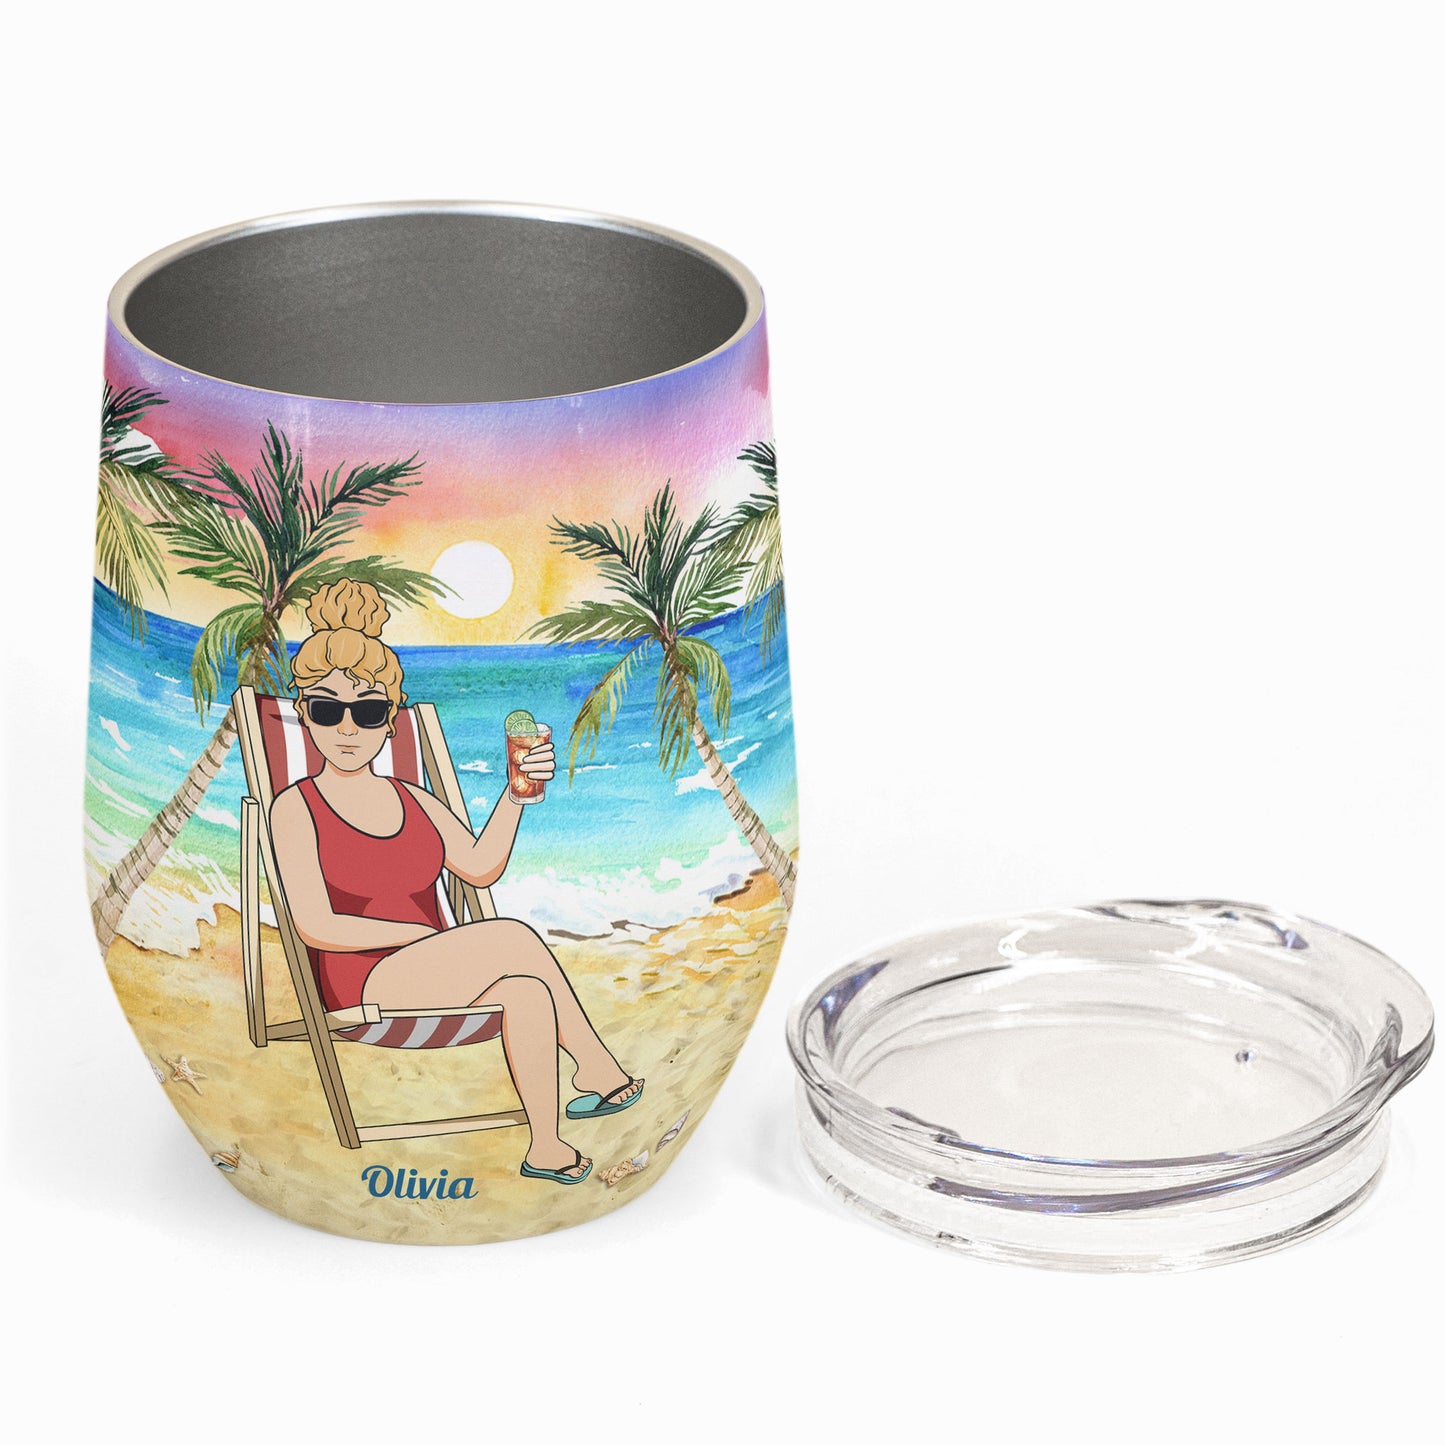 40Th, 50Th, 60Th Still Hot - Personalized Wine Tumbler - Birthday, Summer Vibe Gift For Grandma,Women, Mom, Wife, Female, Sister, Aunt, Friend